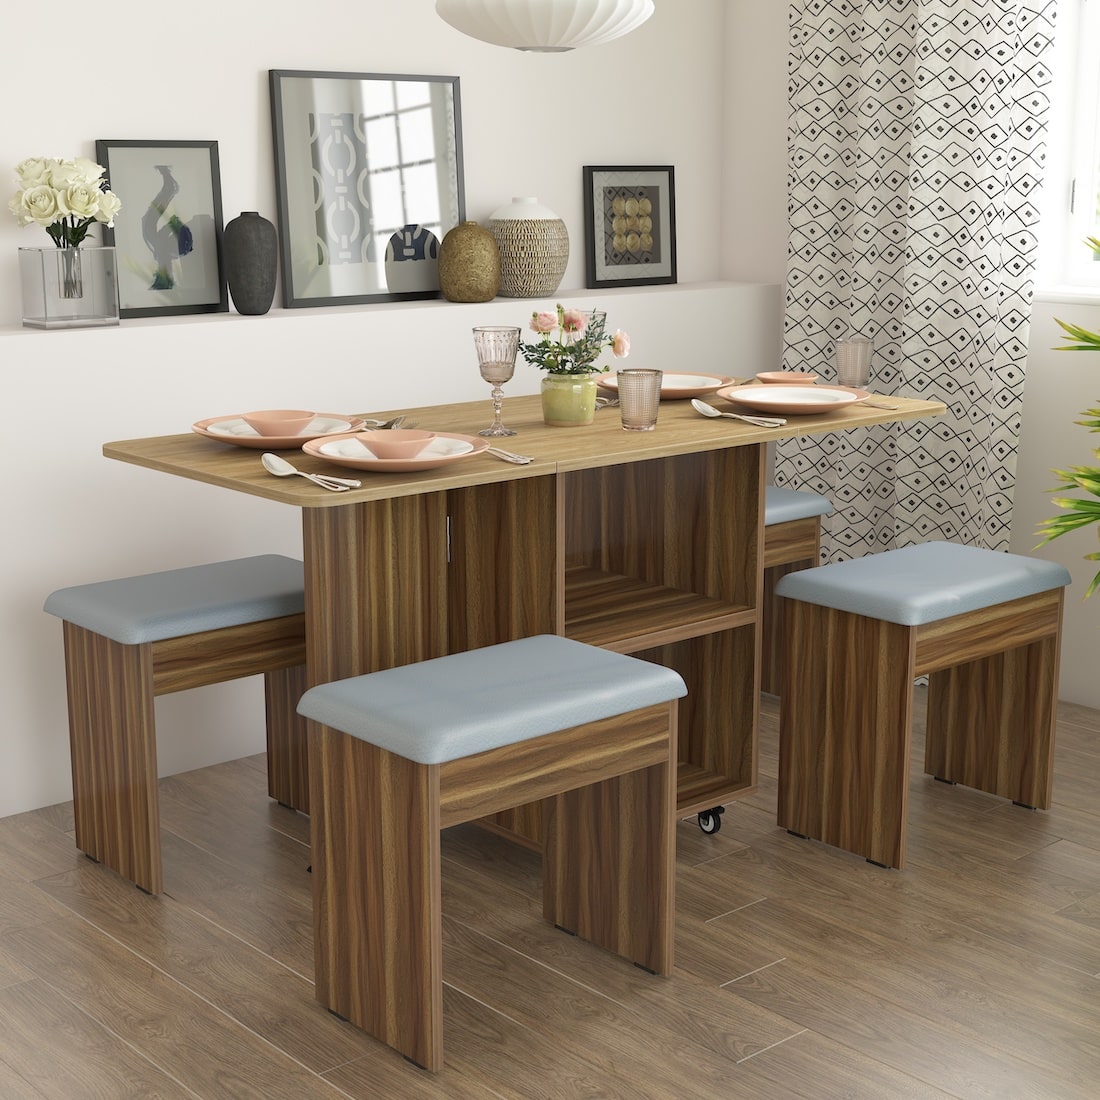 Bonbon 4 Seater Folding Dining Table with Inbuilt Seating